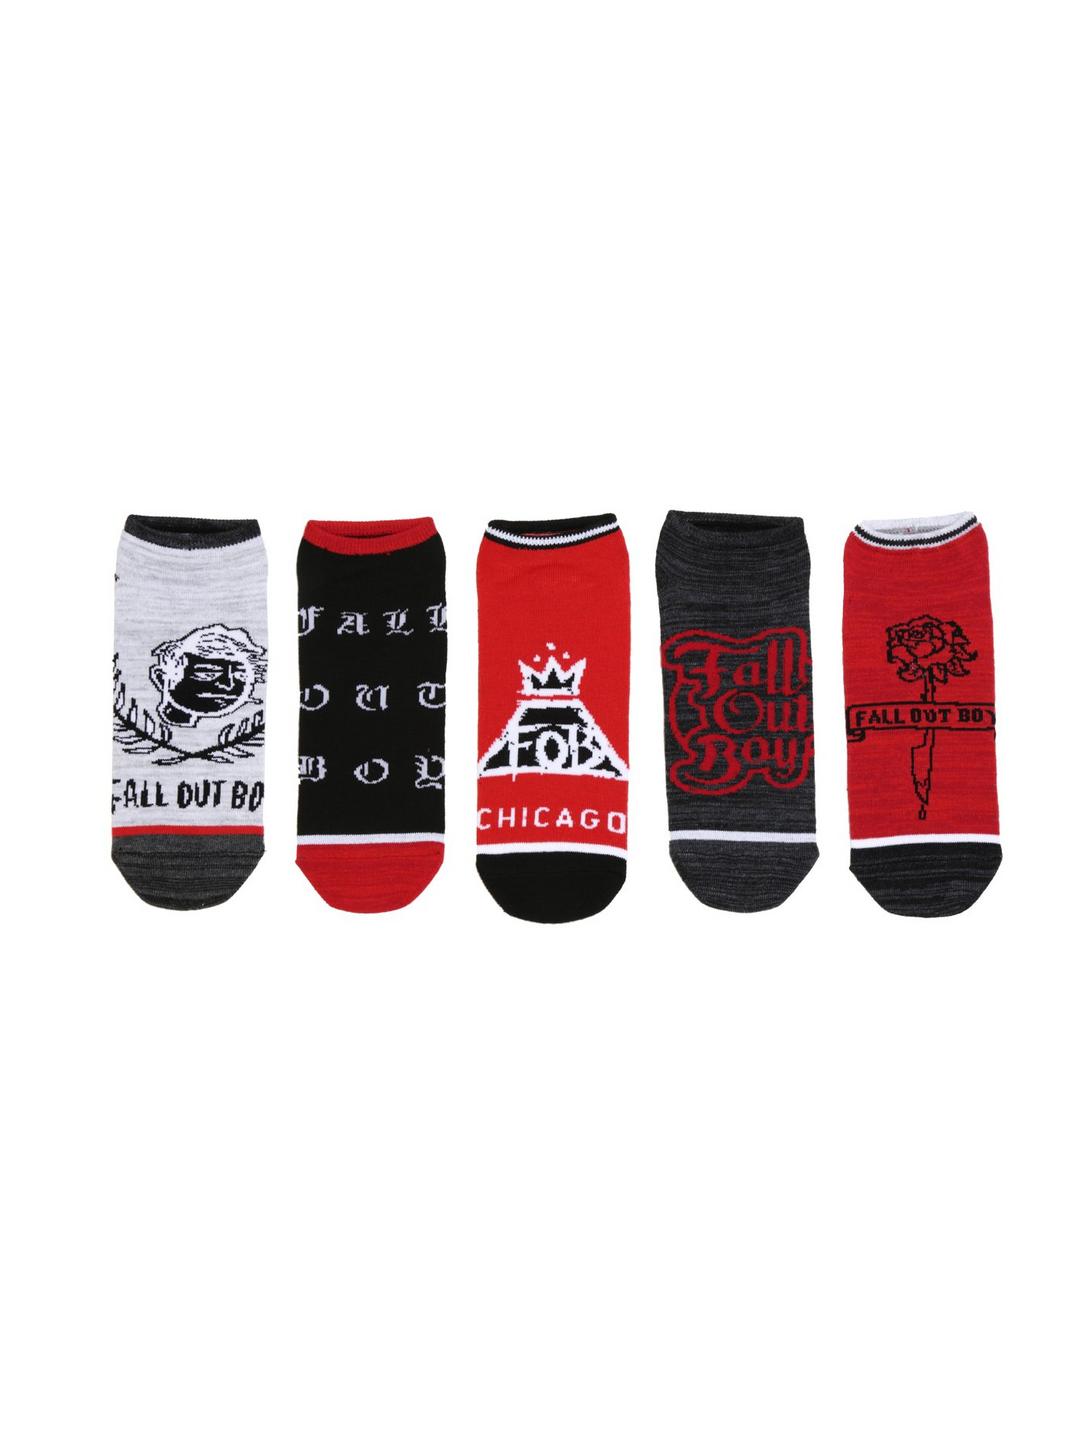 Fall Out Boy Red And Black No-Show Socks 5 Pair, , hi-res